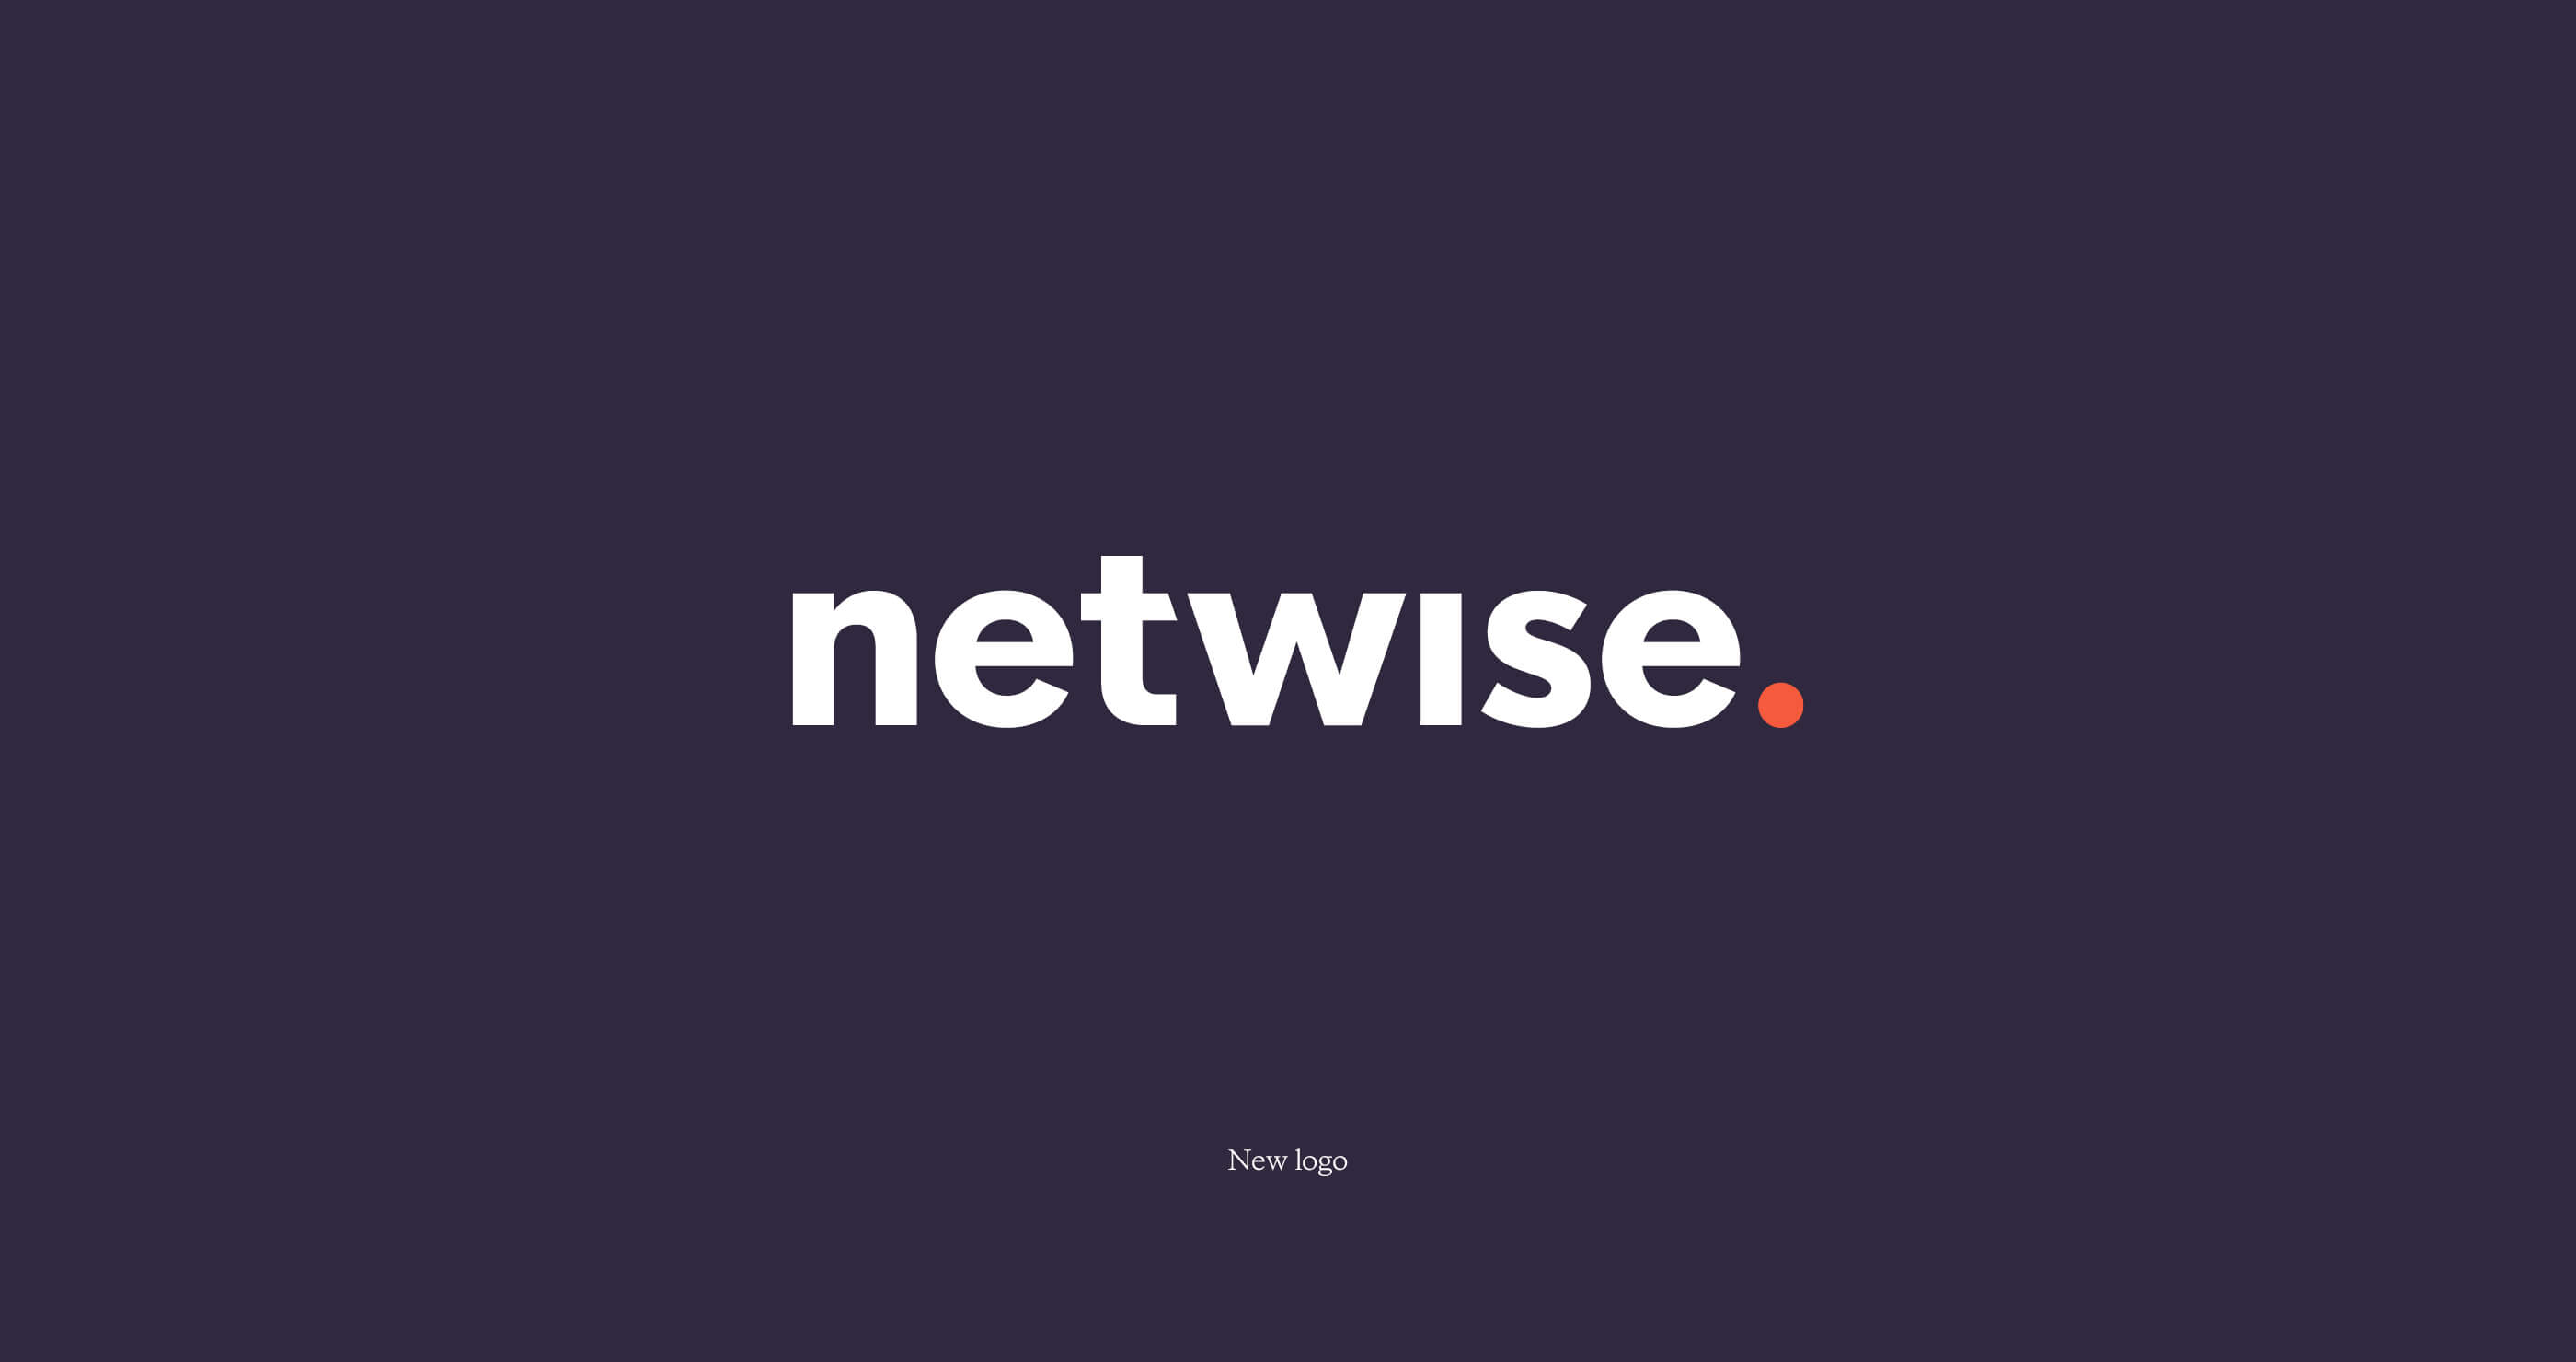 New Netwise corporate logo and identity. Lowercase name in white, with an orange full stop on a purple background